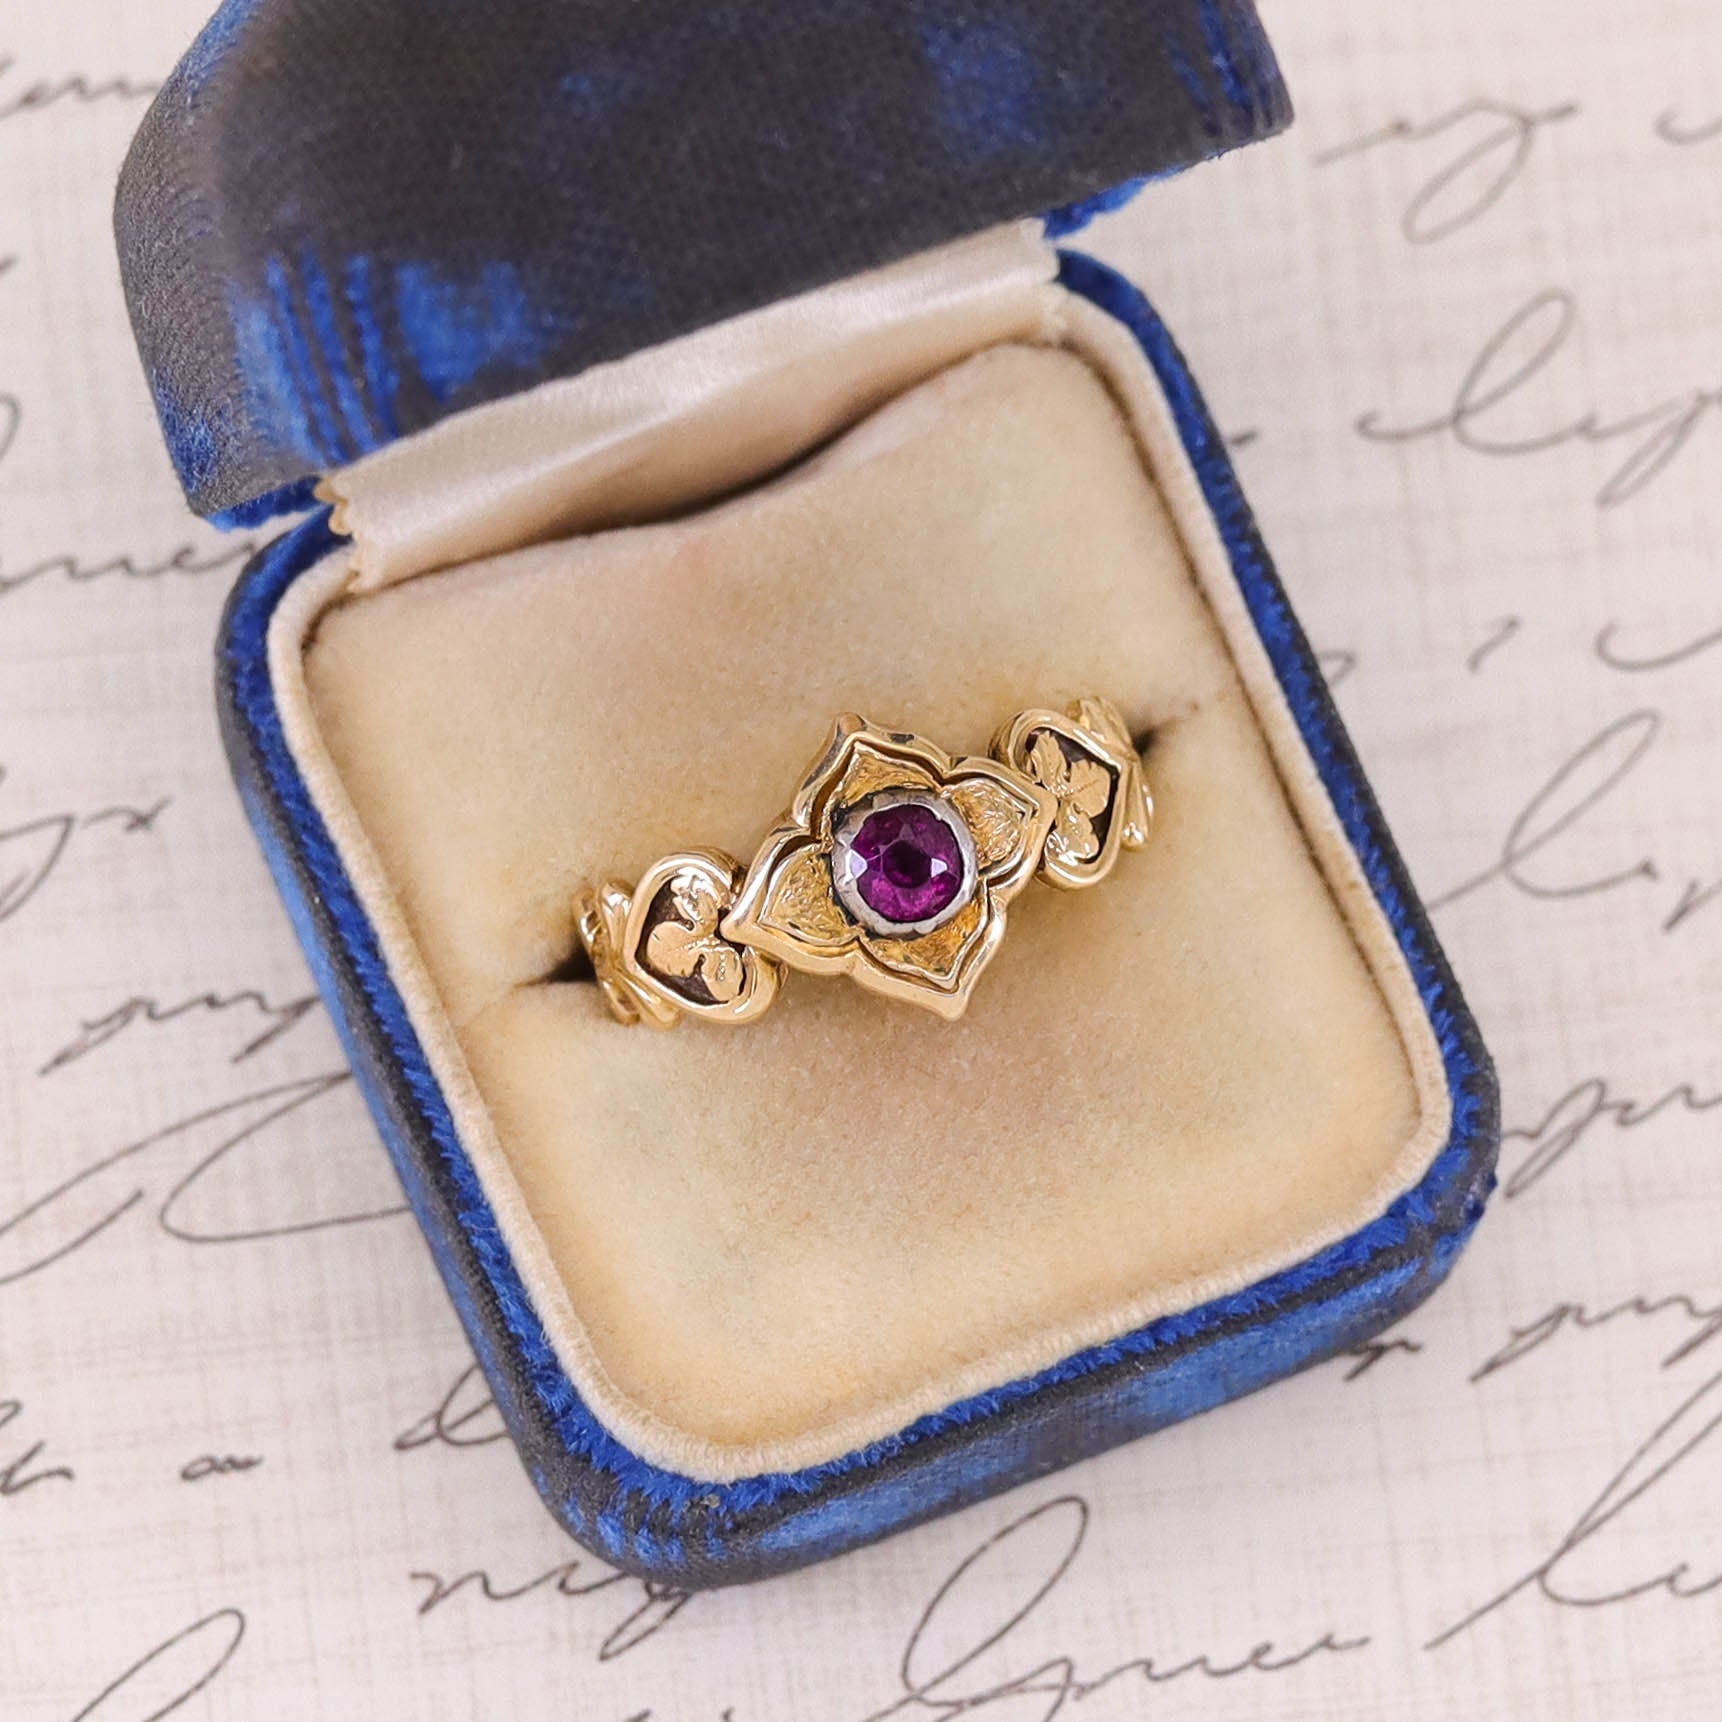 Georgian Mourning Ring with a Rhodalite Garnet in 18k Gold